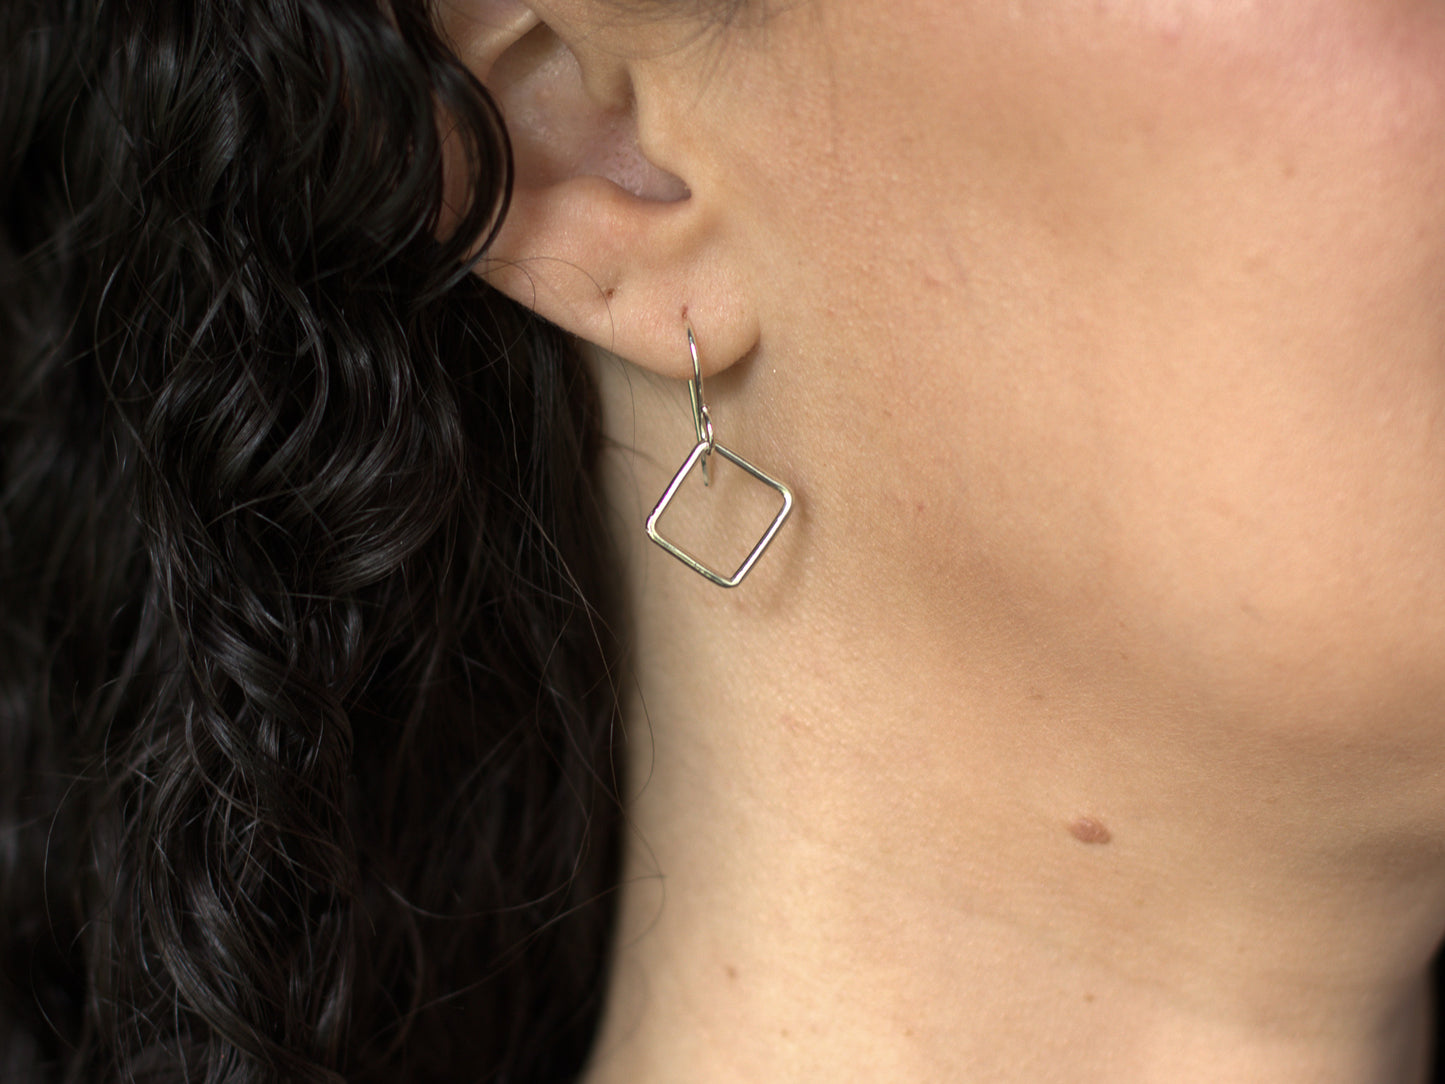 Practice Mindful Breathwork with our Box Breathing Earrings